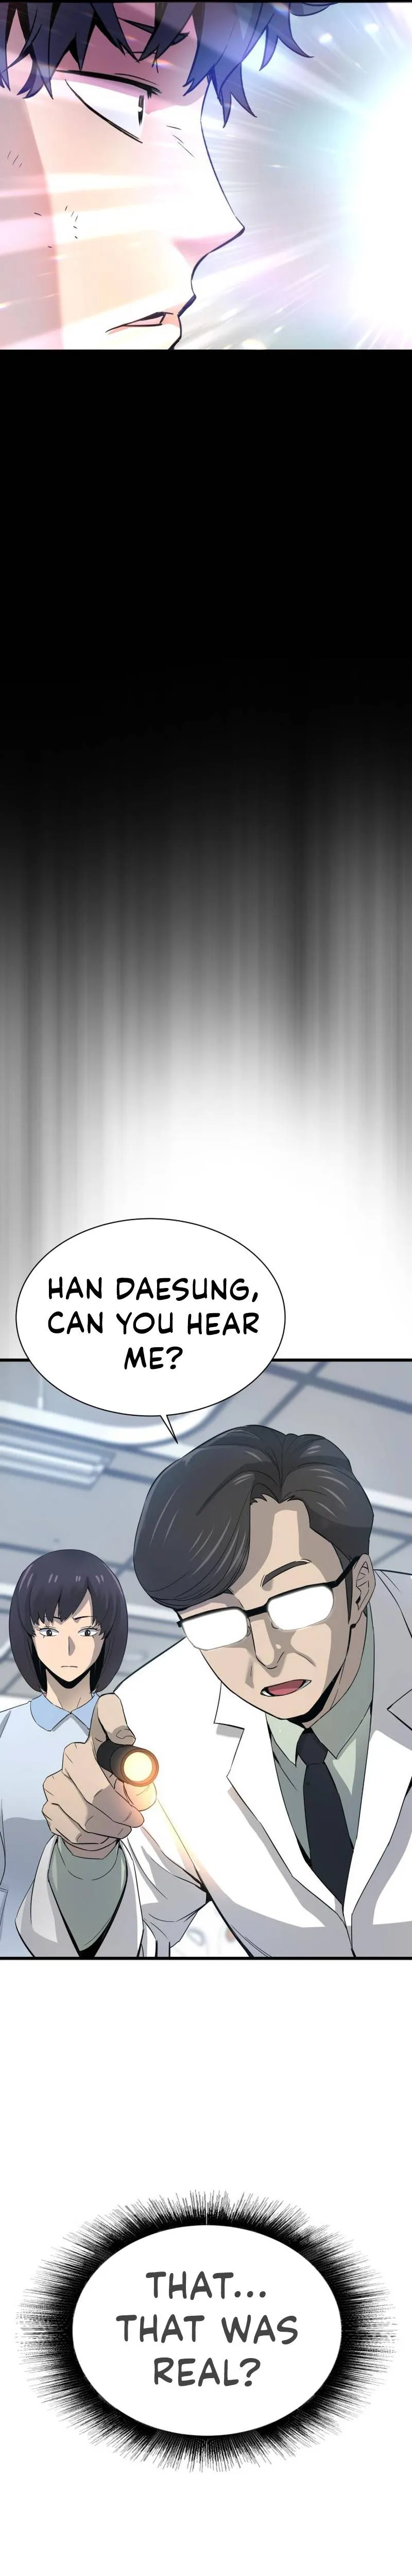 Han Dae Sung Returned From Hell Chapter 1 page 35